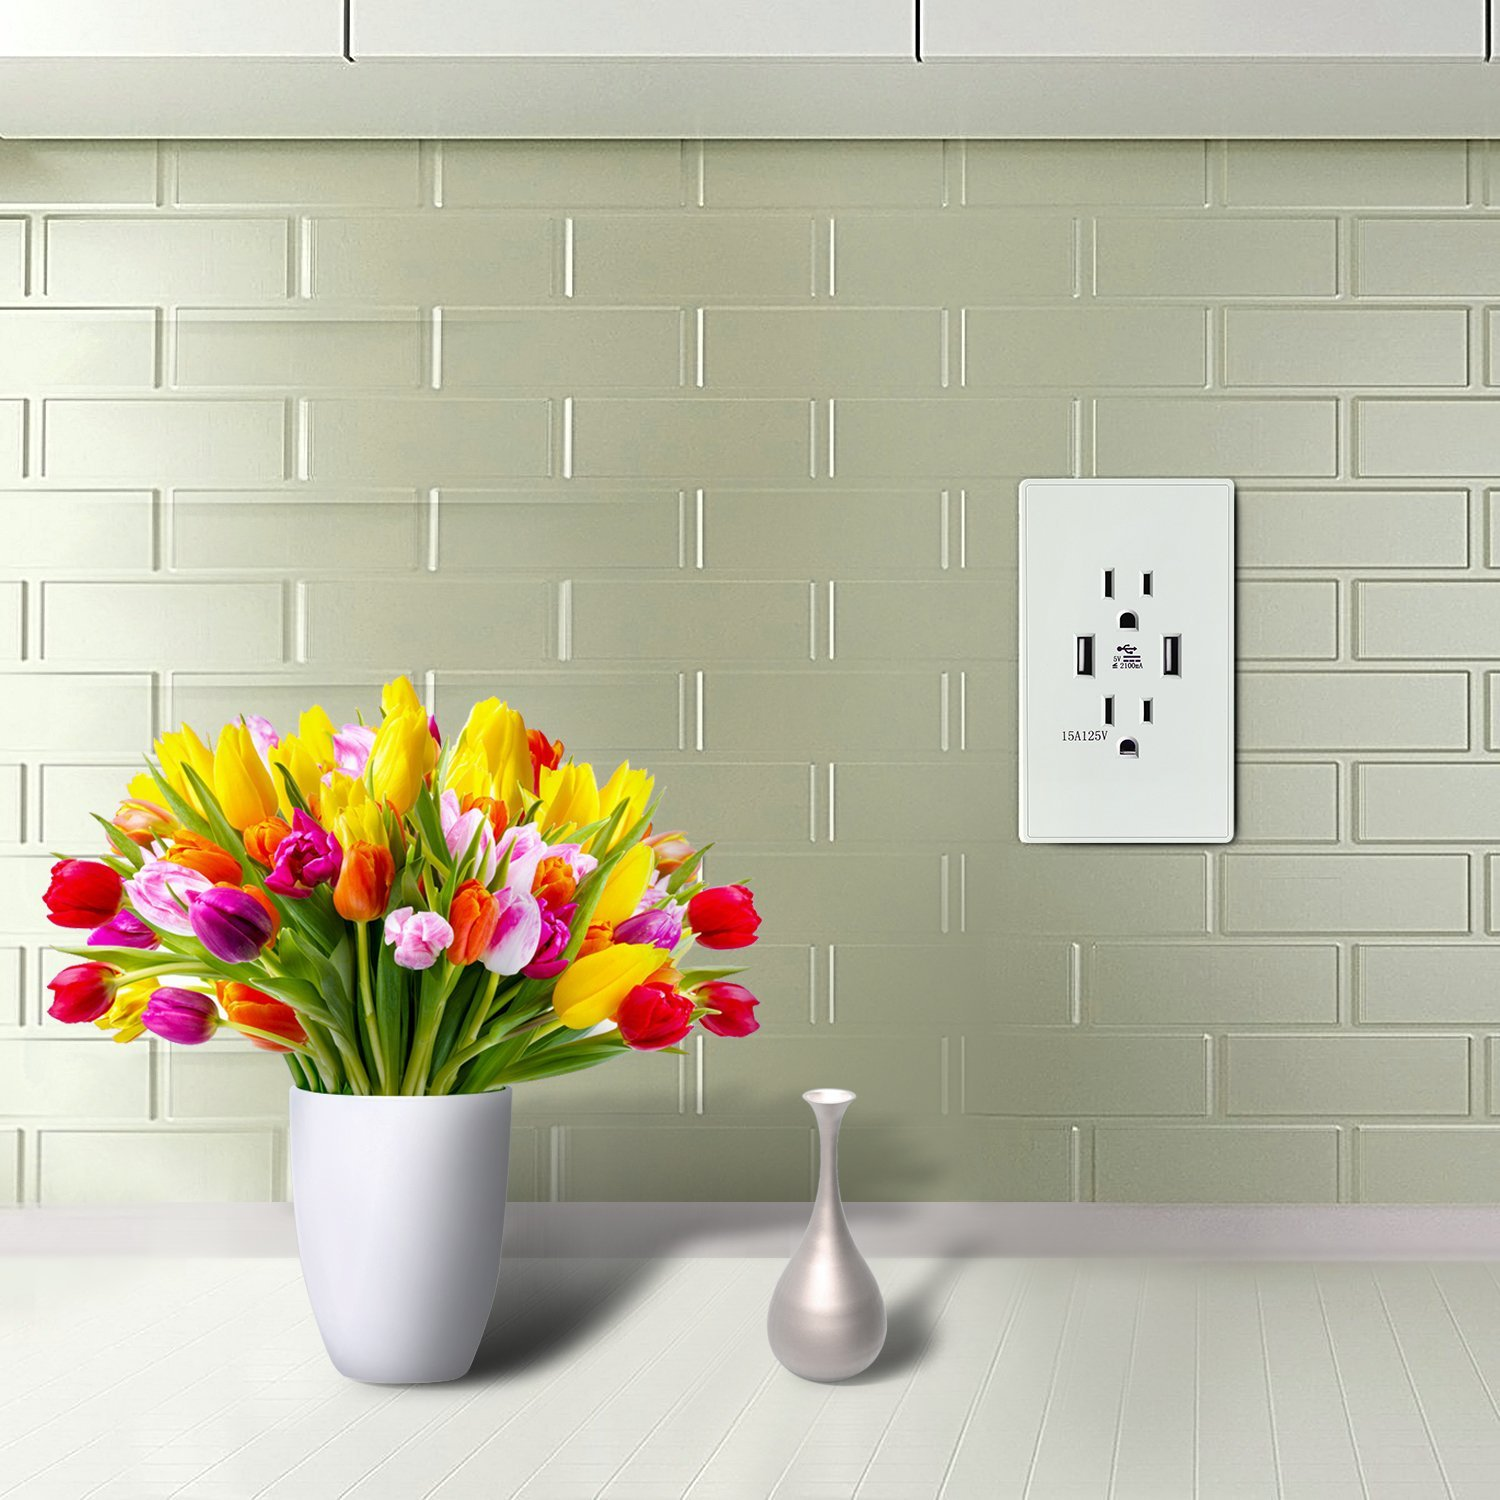 High Speed USB Wall Socket Receptacle Only $16.99!